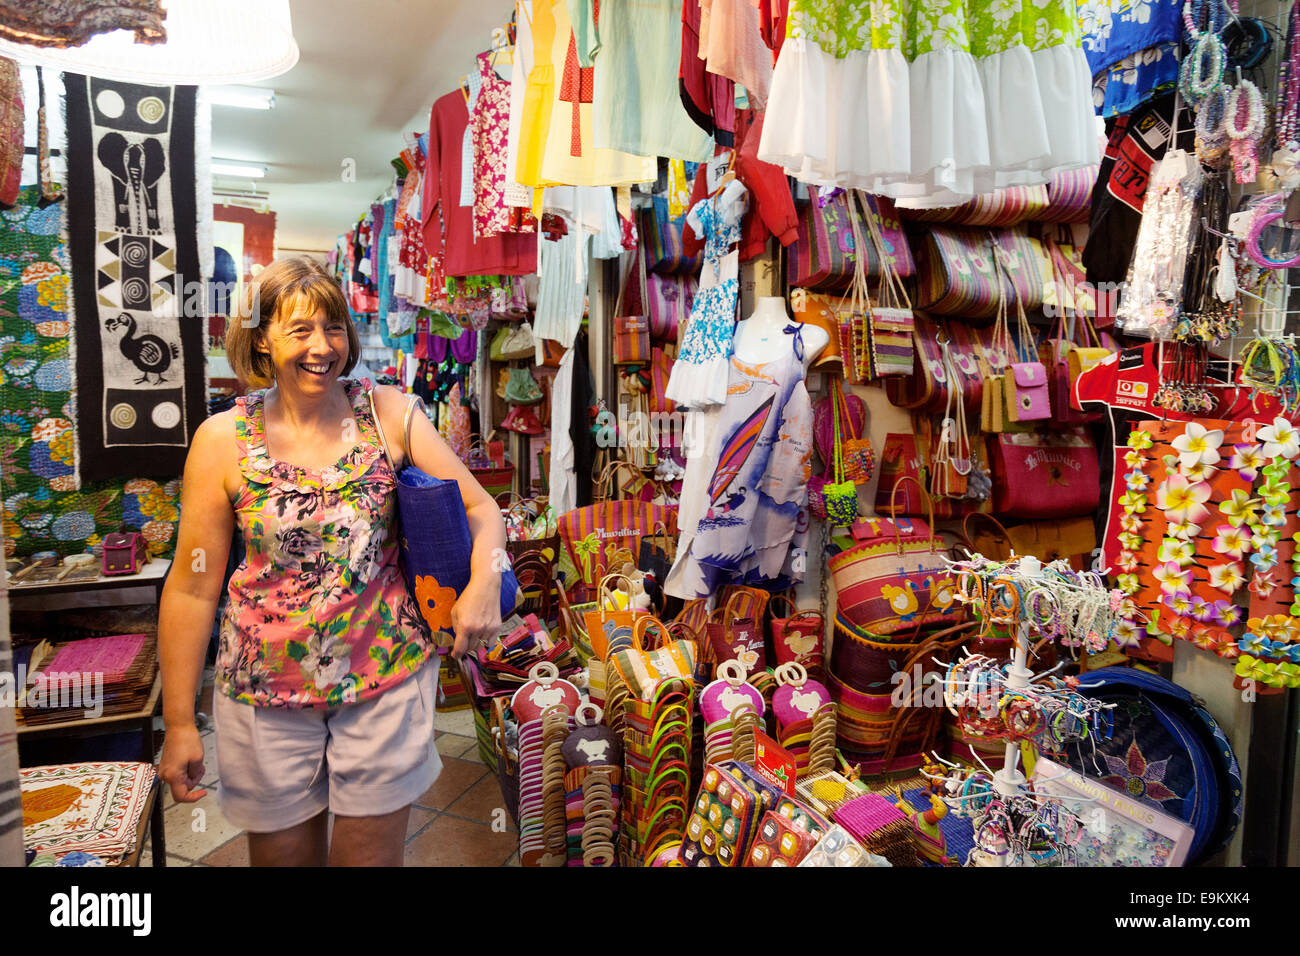 A woman tourist shopping in the indoor clothing market, Port Louis, Mauritius Stock Photo